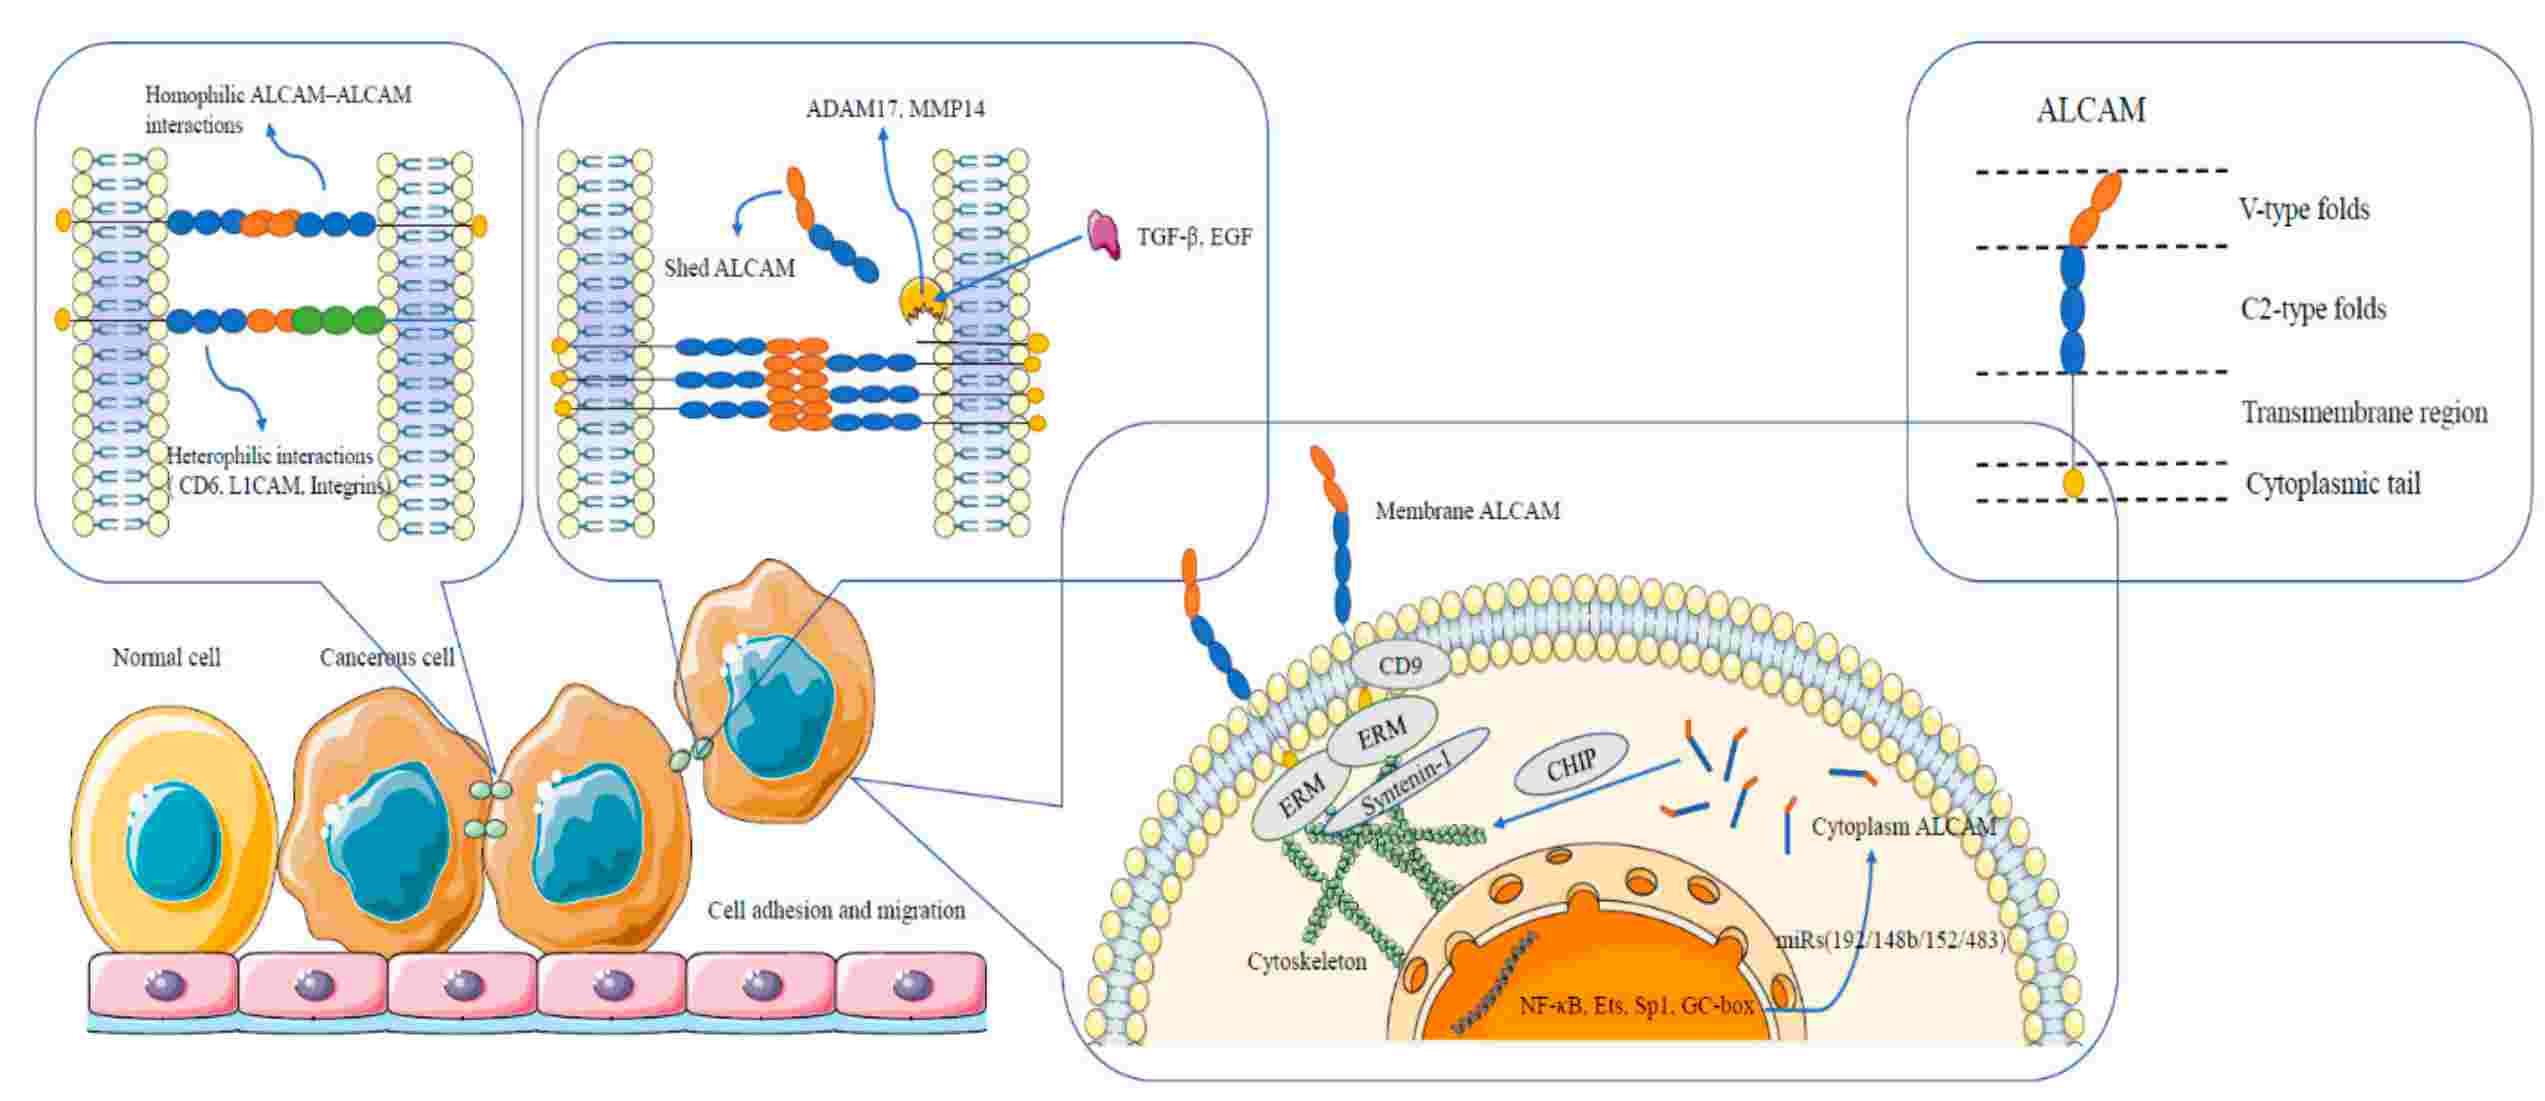  ALCAM structure and interactions between and within cells.